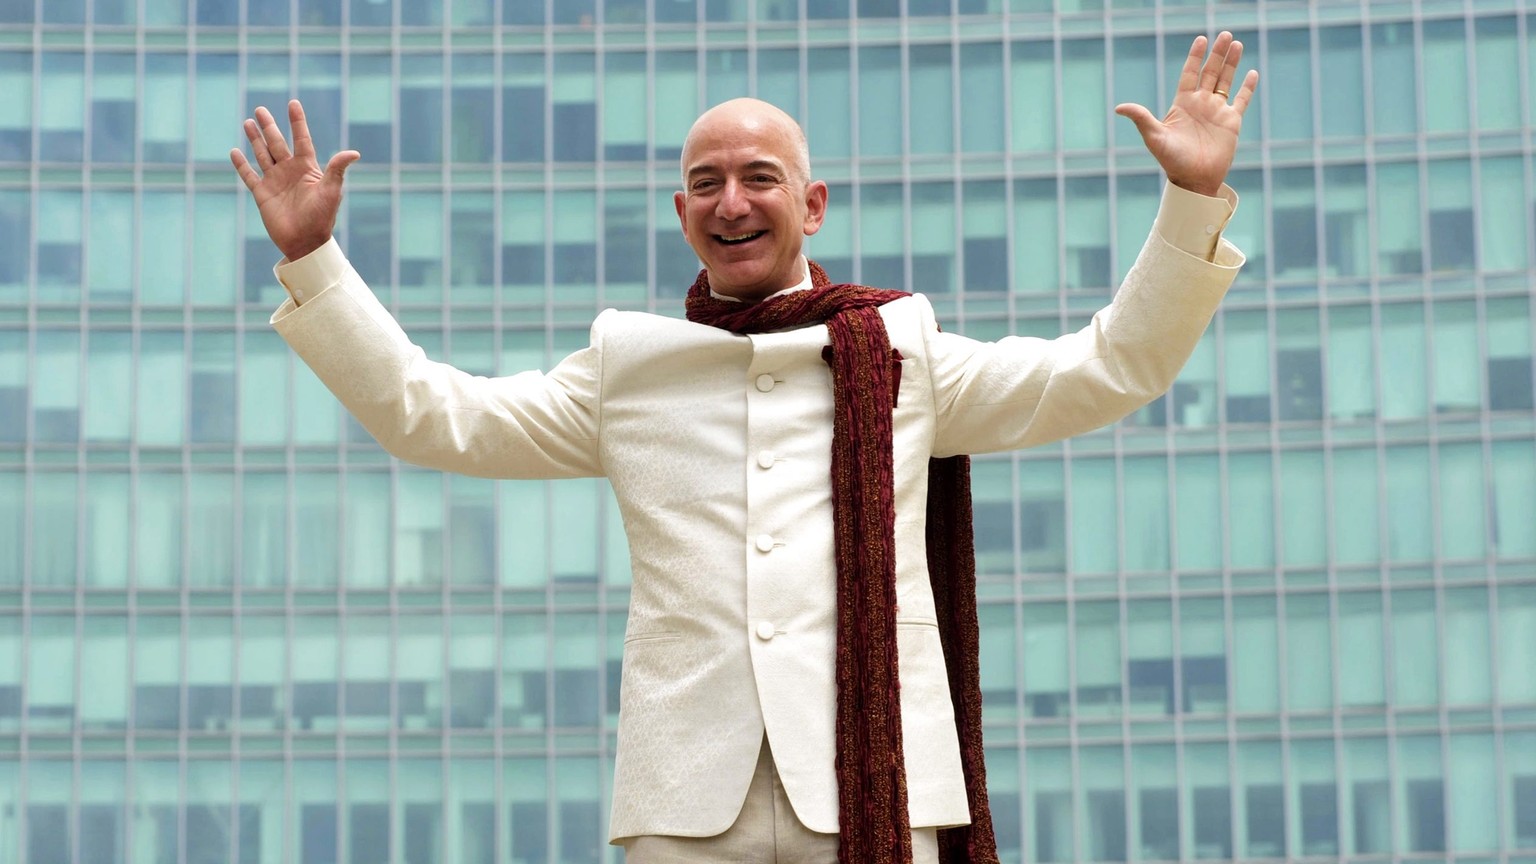 epa04421429 Jeff Bezos, Founder and Chief Executive Officer of Amazon.com, waves for a photograph in Bangalore, India, 28 September 2014. Bezos is promoting Amazon's investment in kitty for India. Ama ...